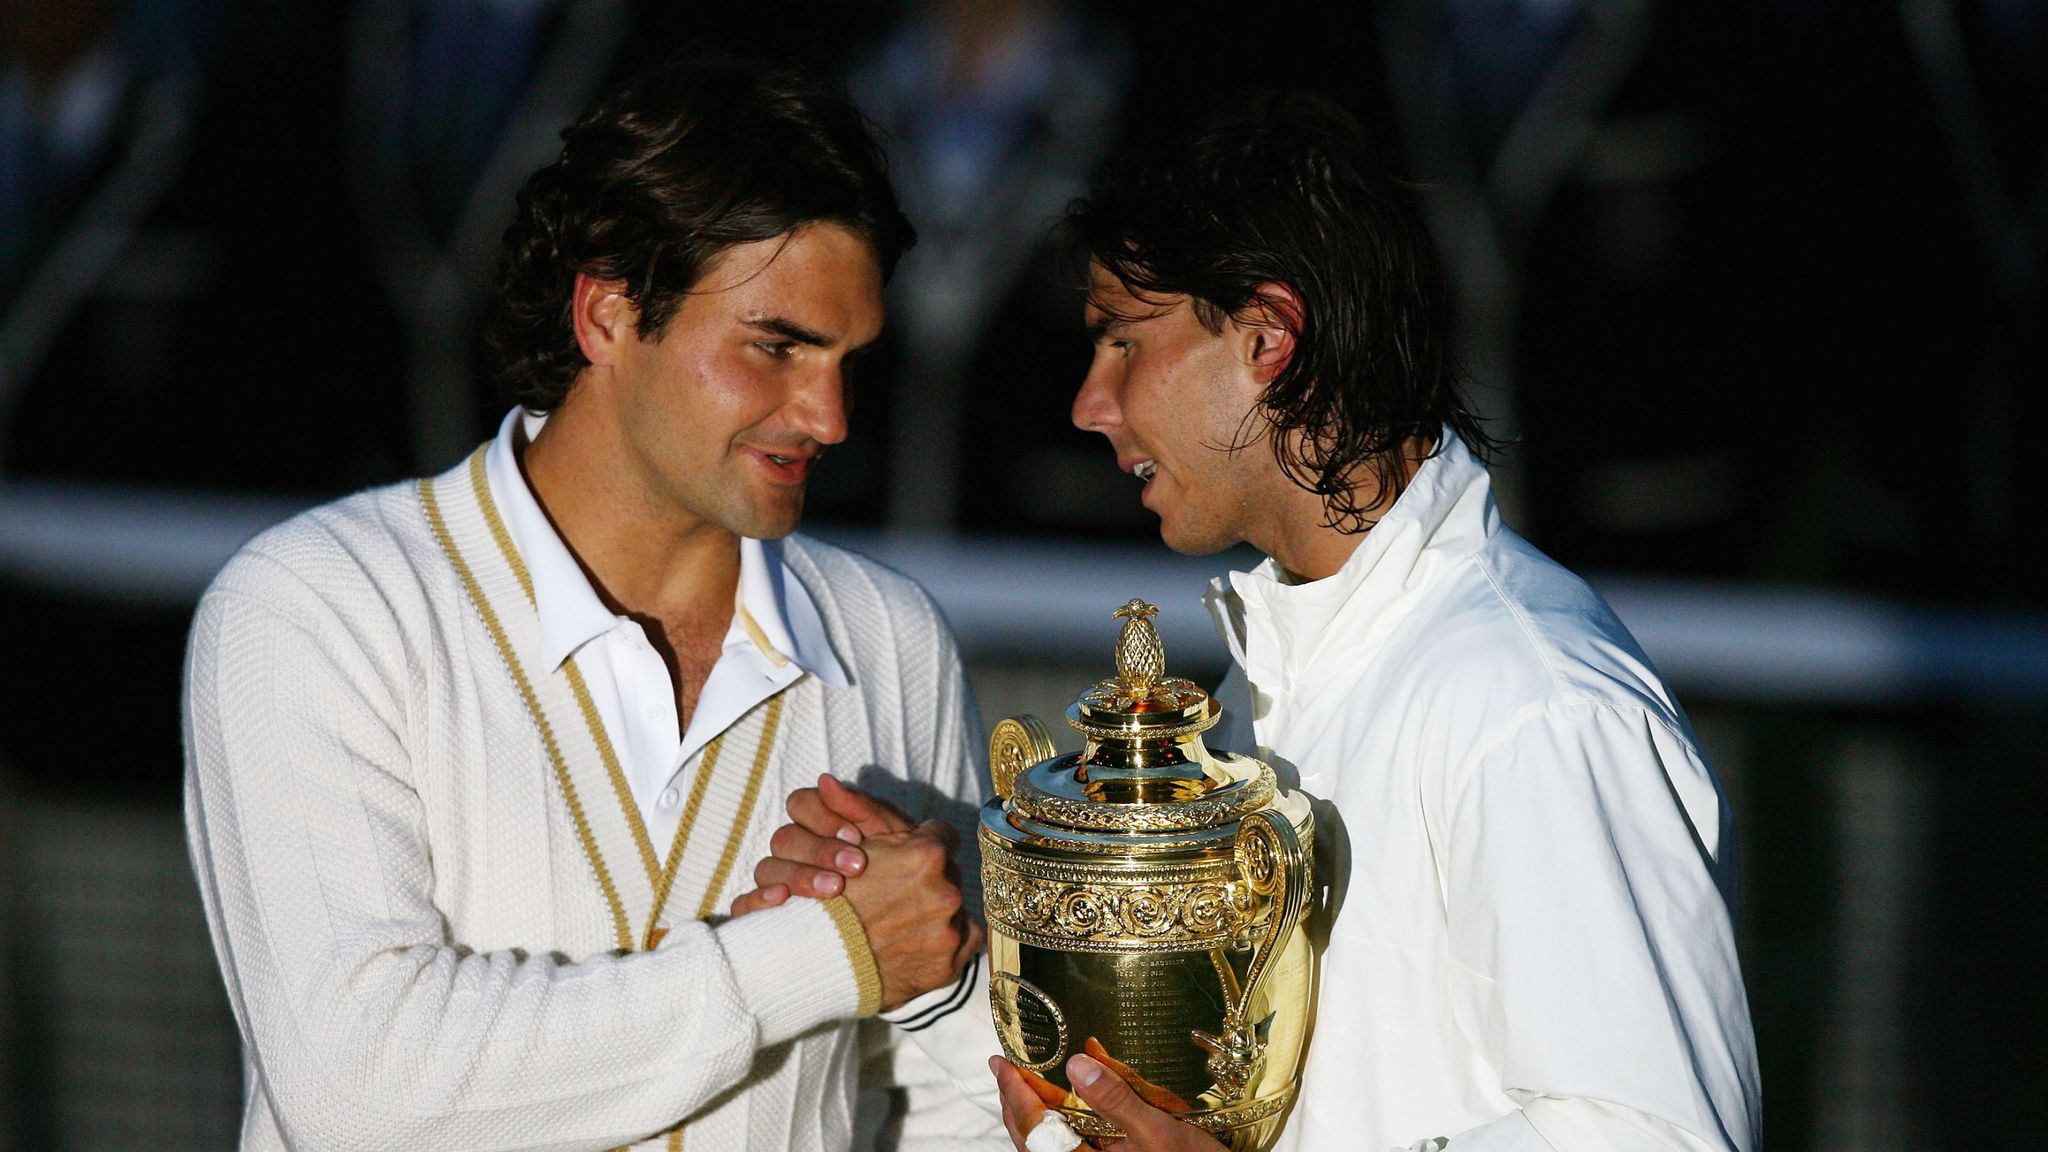 Roger Federer v Rafael The two legends meet again at Wimbledon 11 years later | Tennis News | Sky Sports